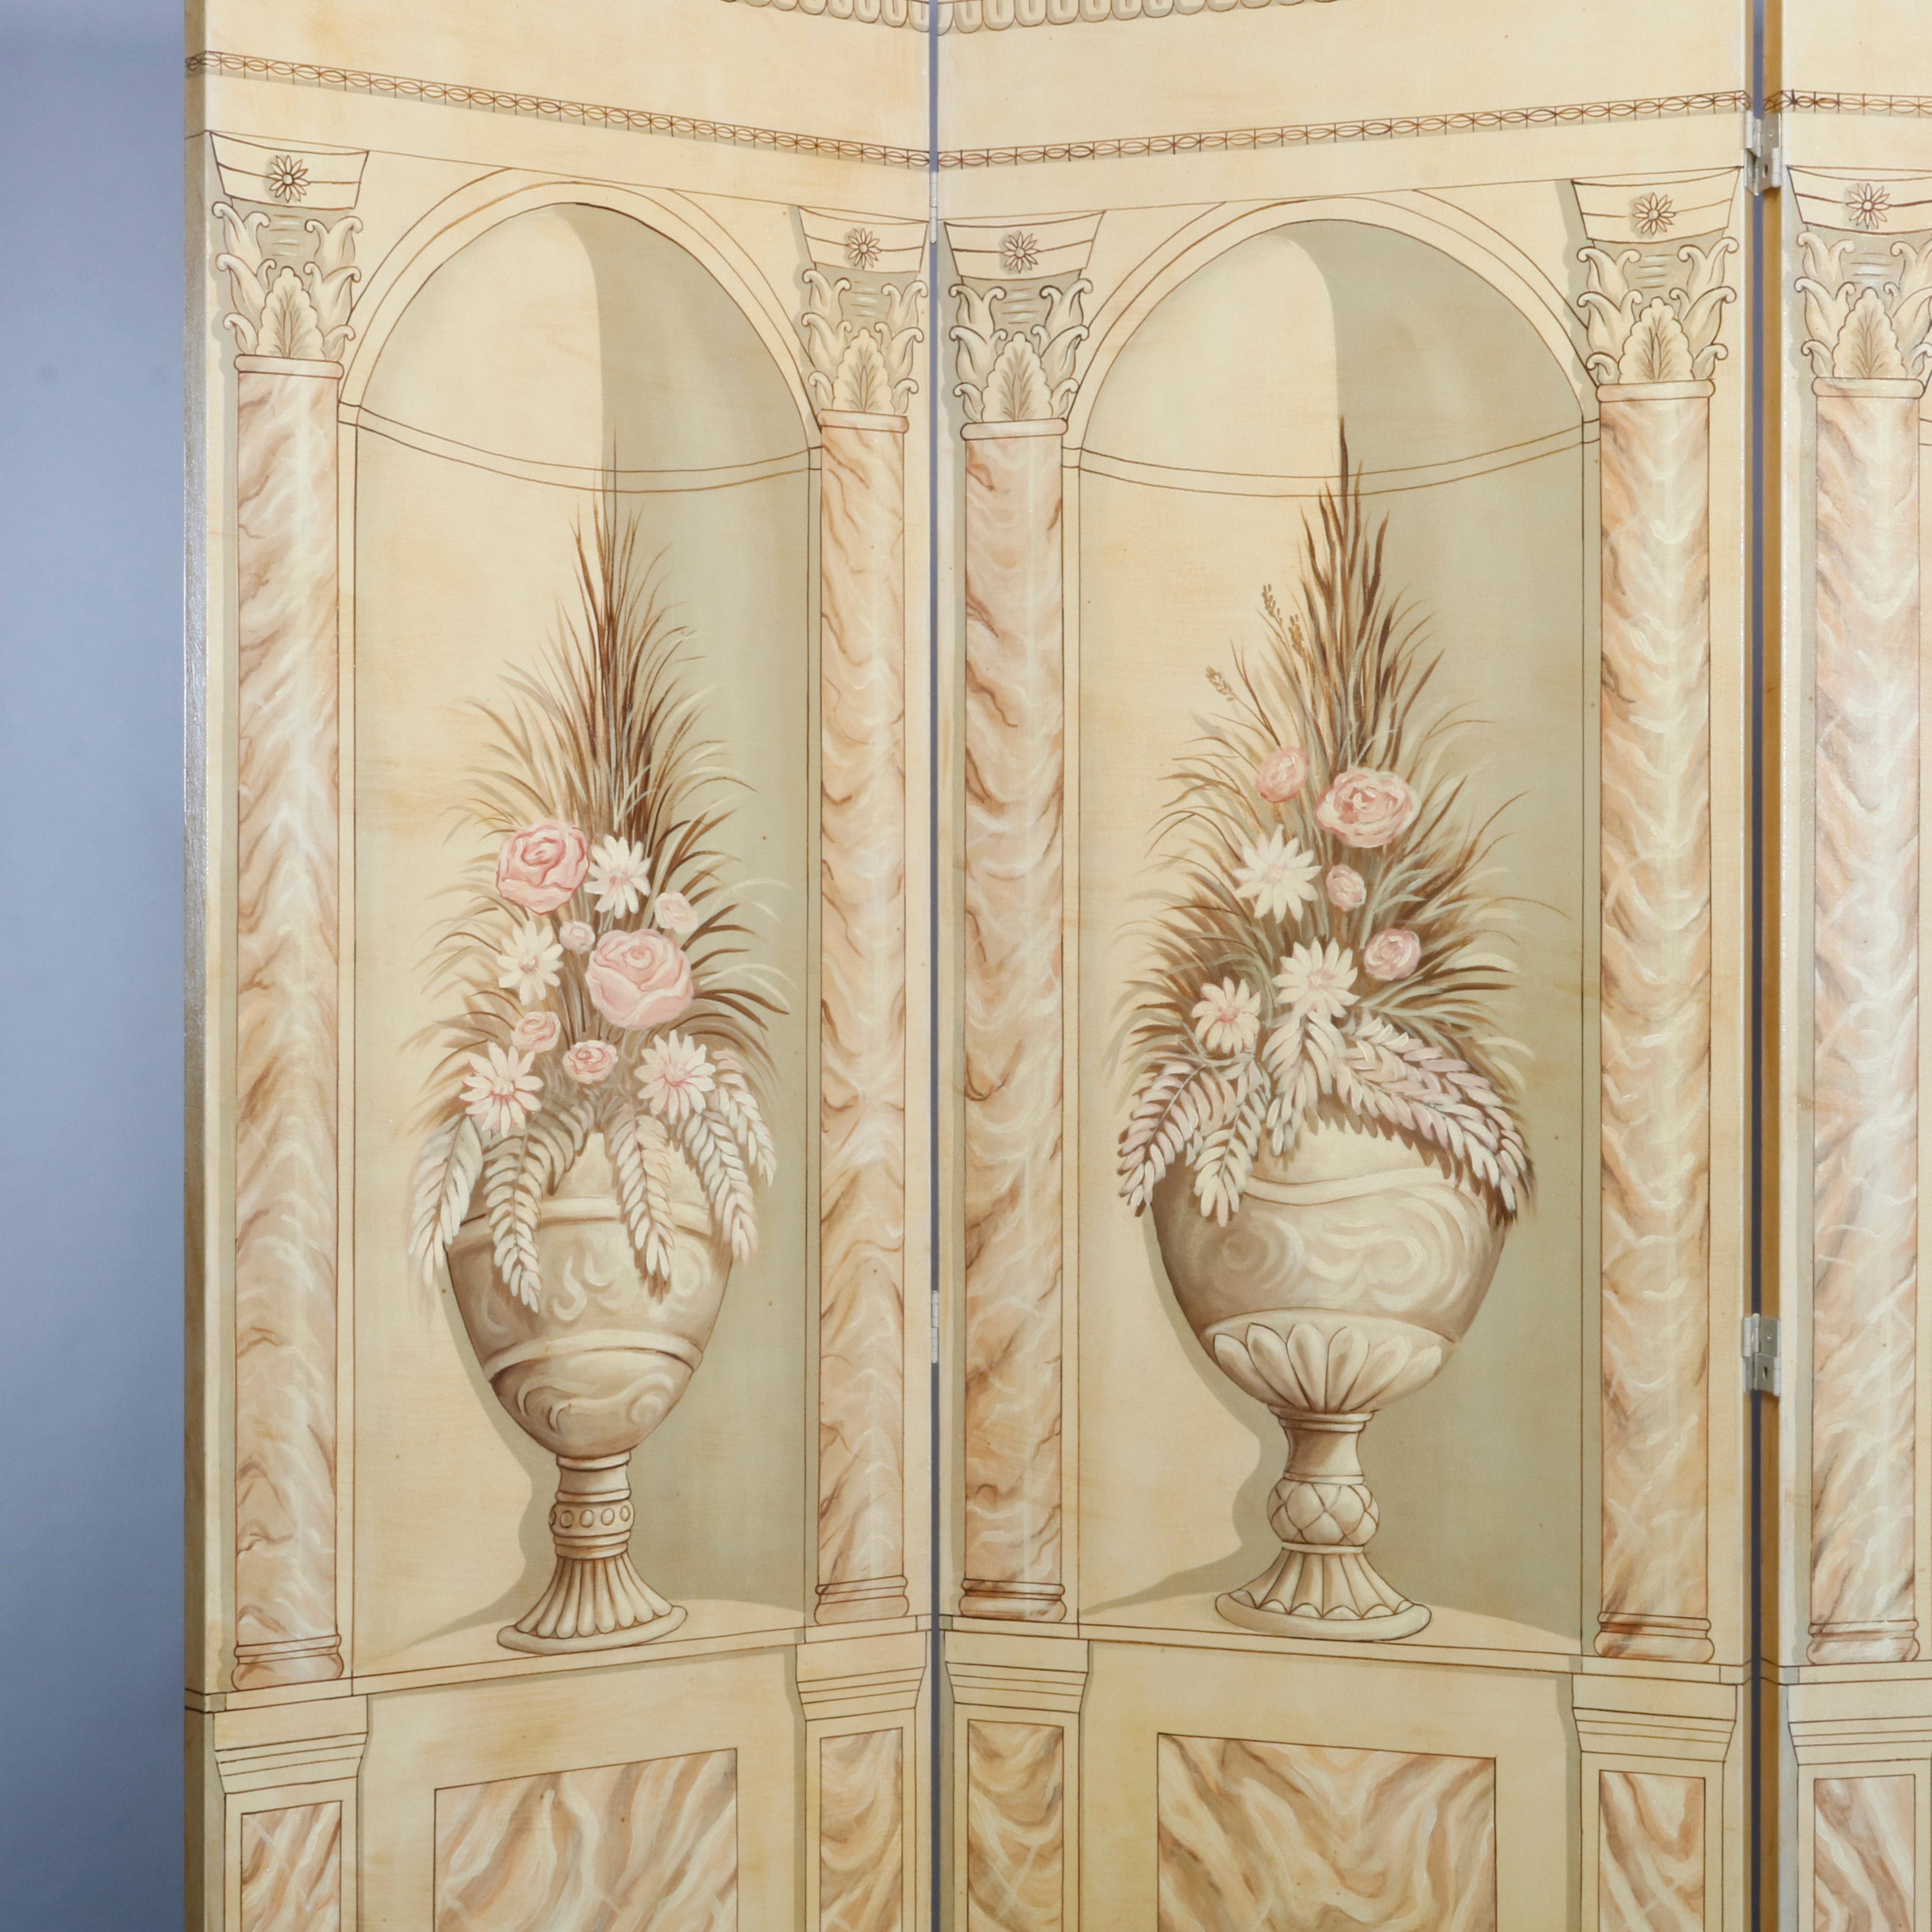 A vintage folding room dividing screen offer three panels with neoclassical design with floral urns and Grecian columns, en verso signed Hayward, 20th century

Measures: 84.13